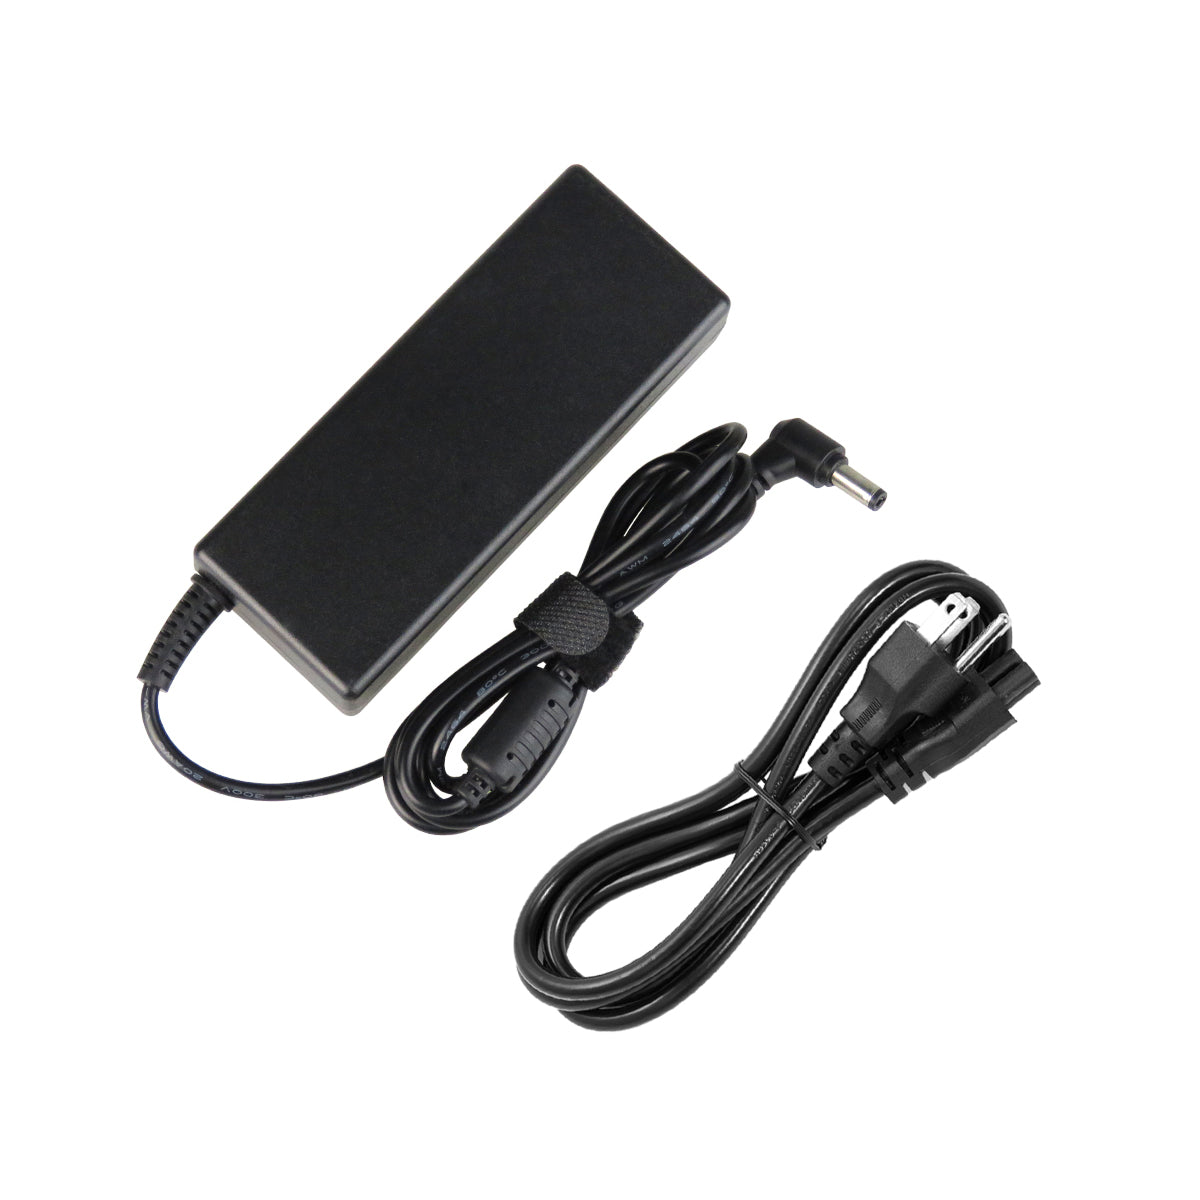 AC Adapter Charger for ASUS X50 Series Notebook.